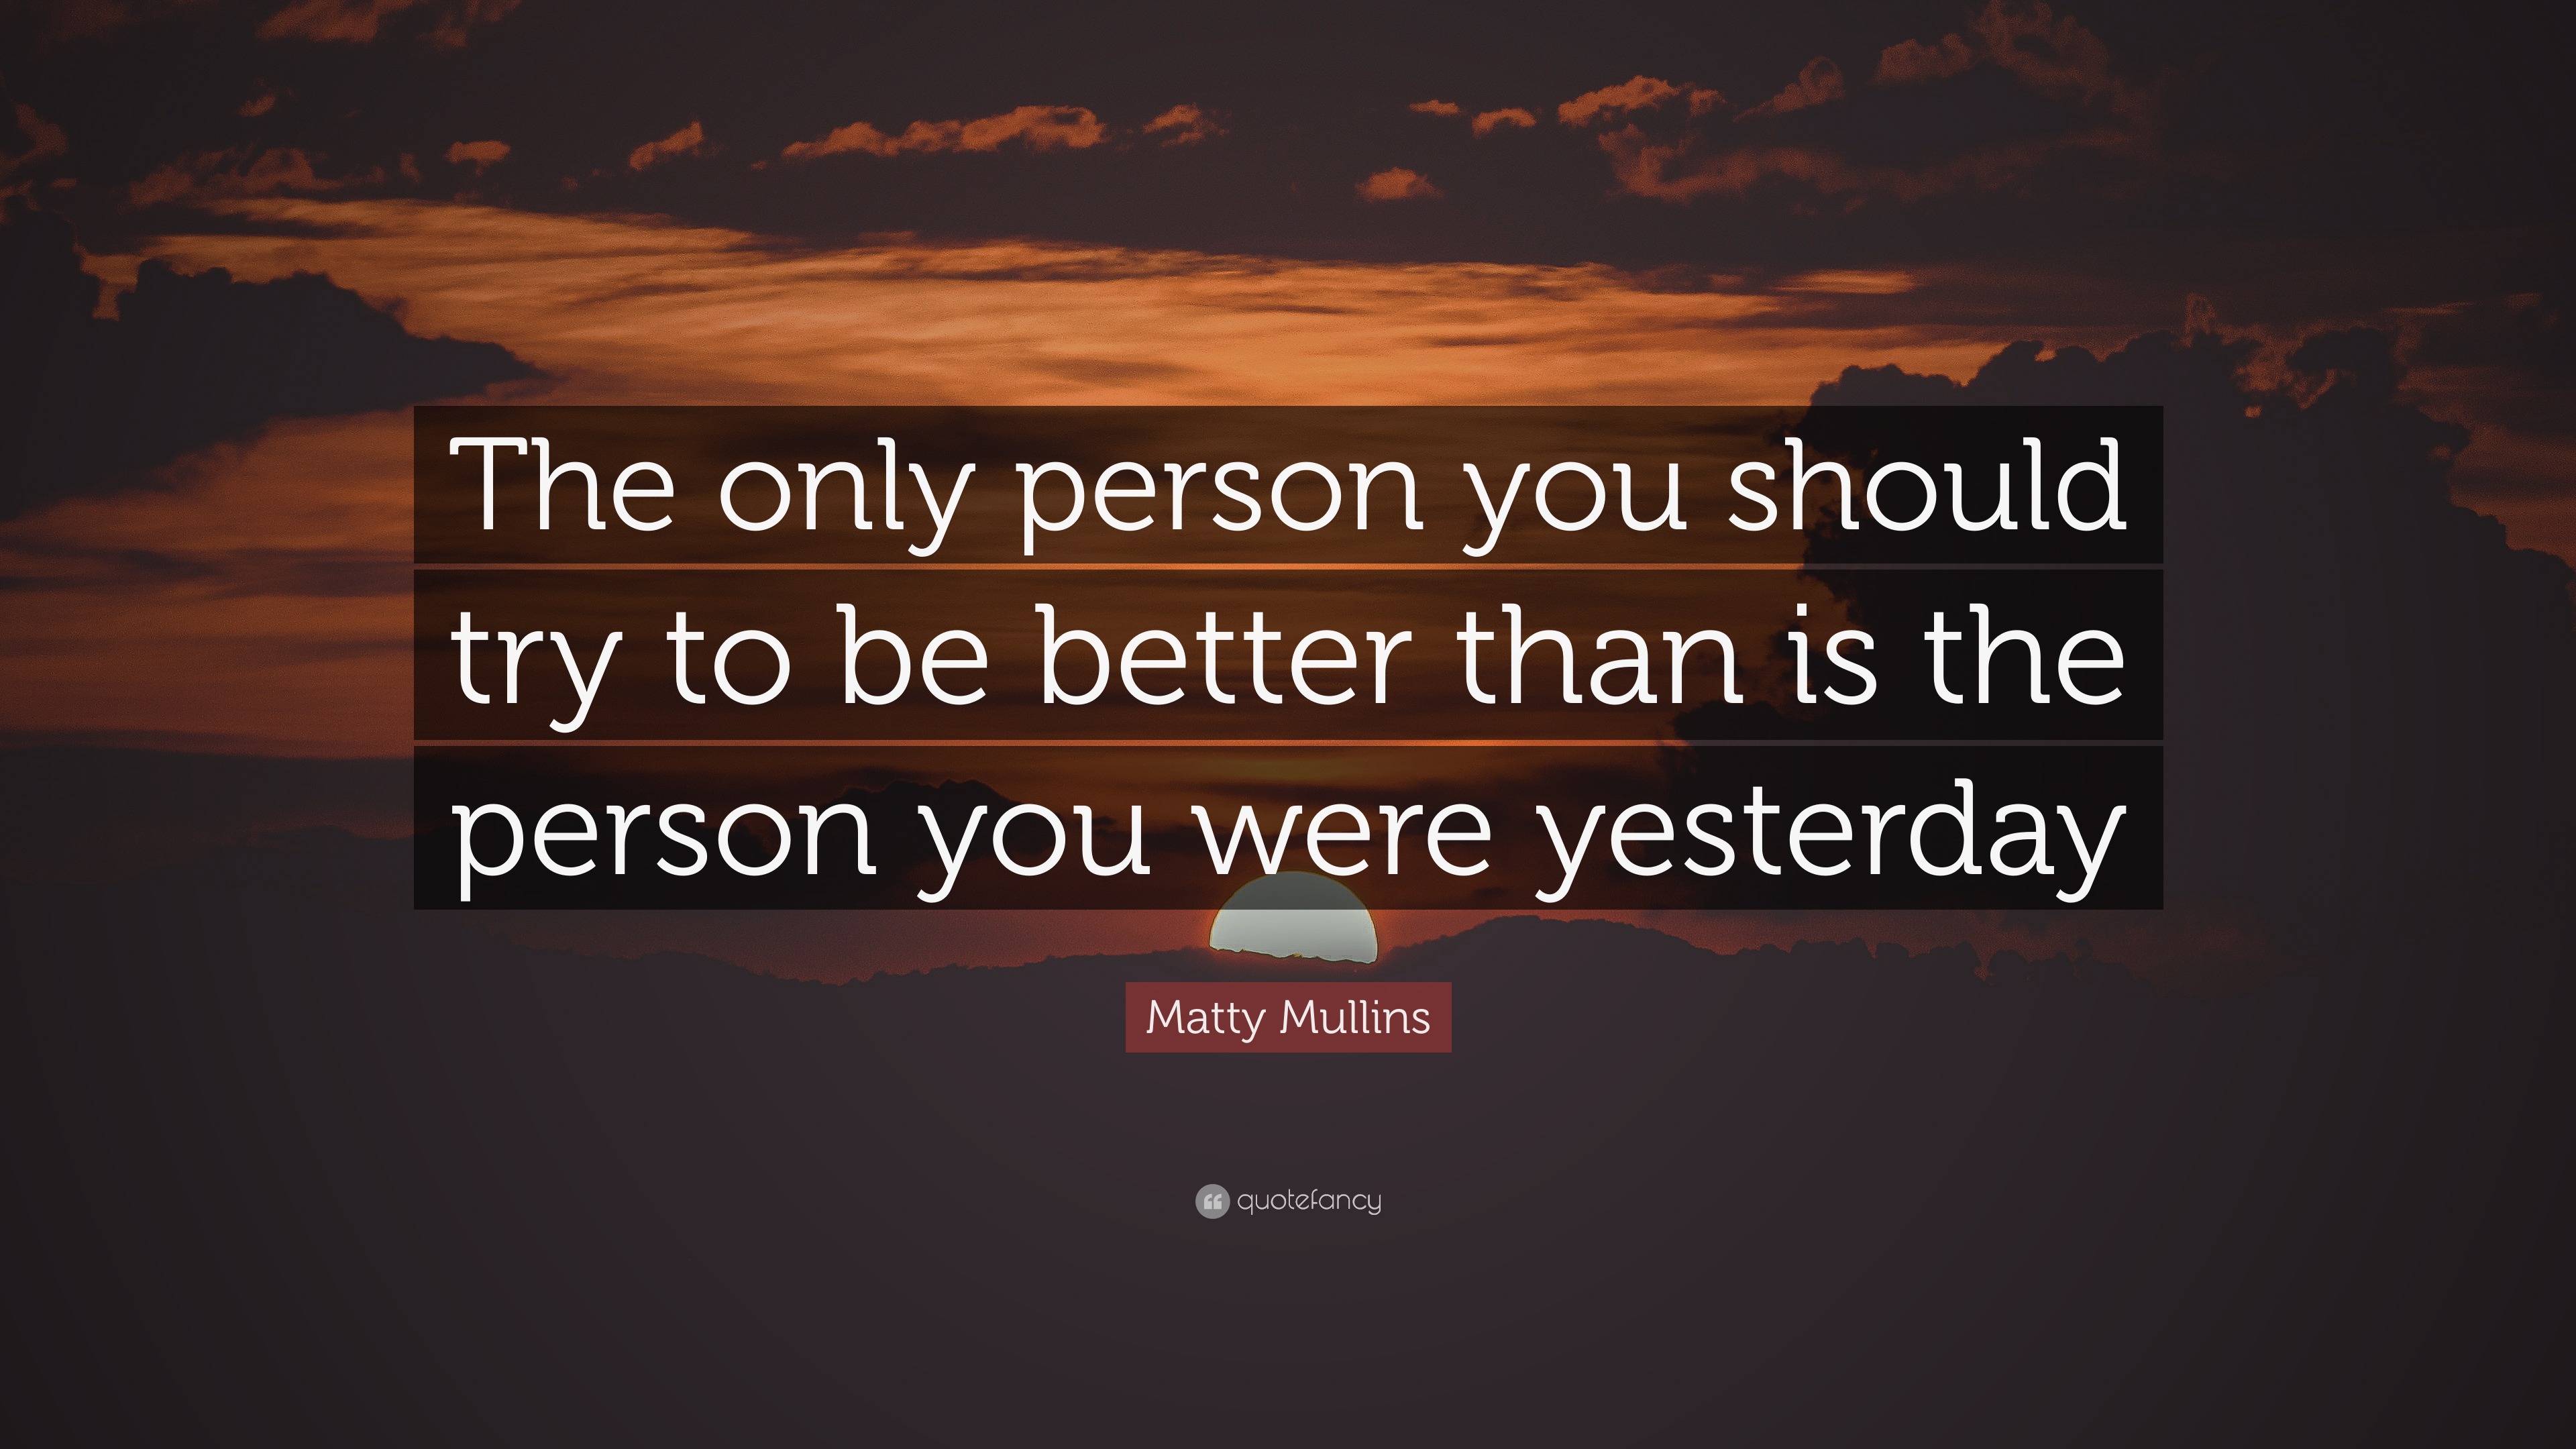 You should try harder. The only person you should be better than is yourself. Be better that you were yesterday. I am better than you images.